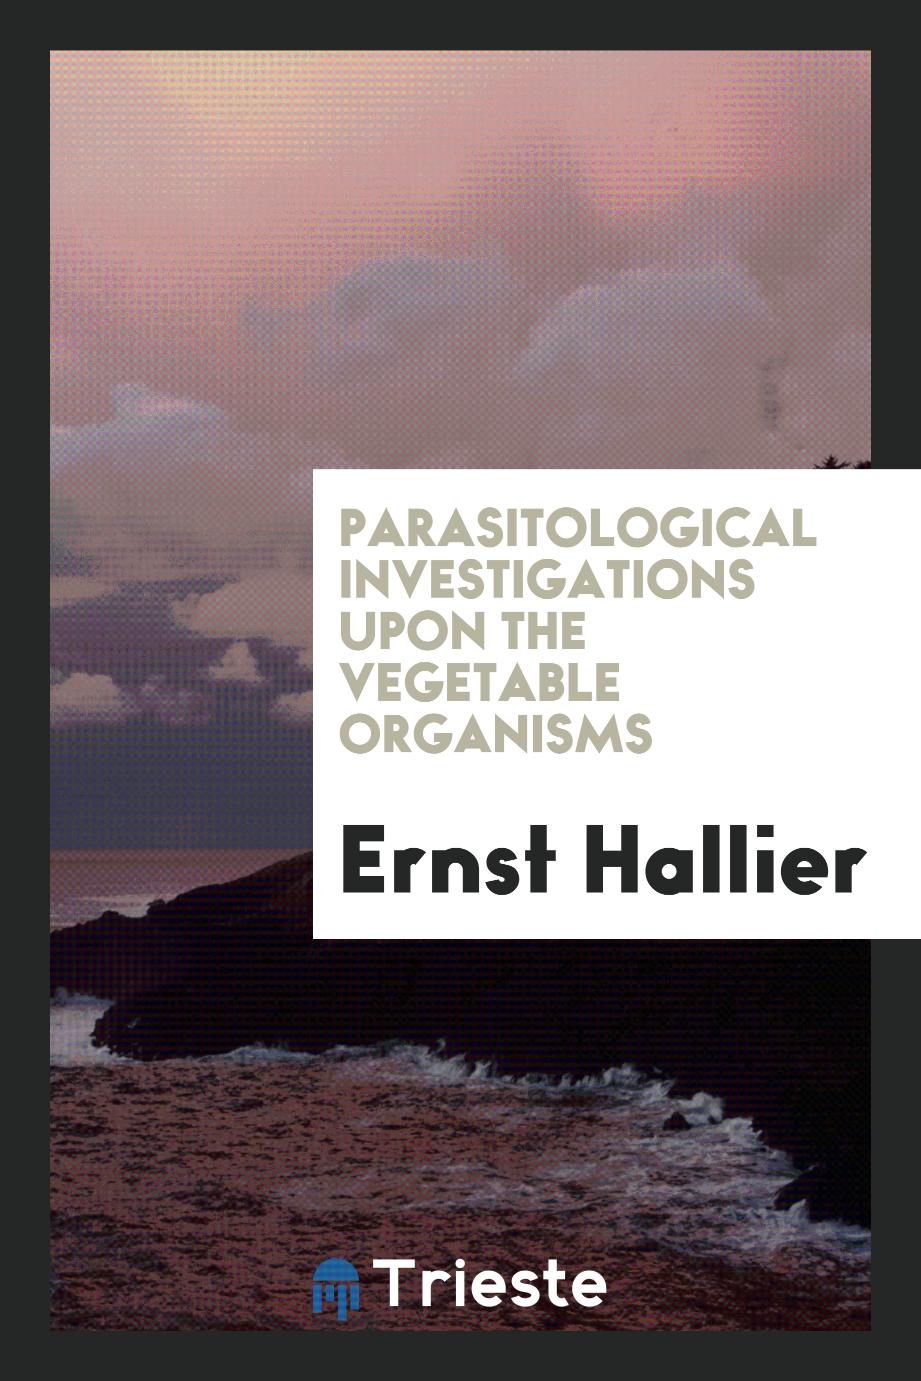 Parasitological Investigations upon the Vegetable Organisms